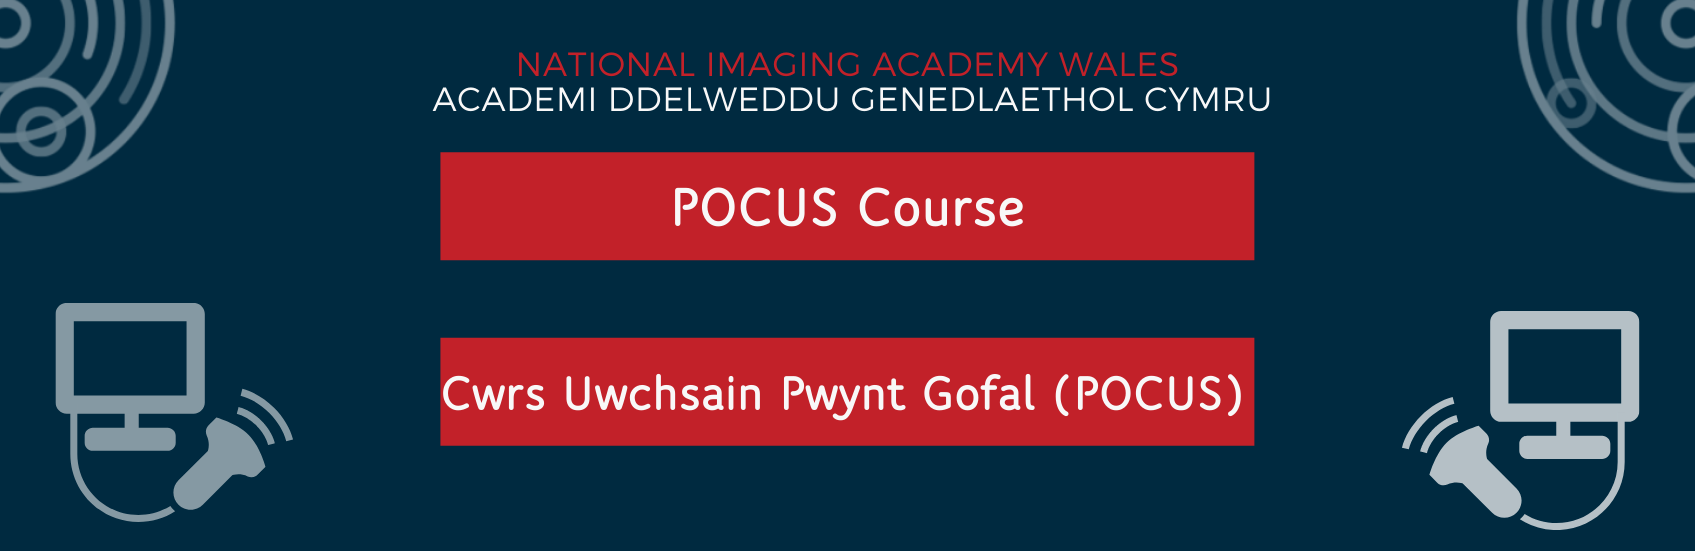 POCUS Course Imaging Academy Wales